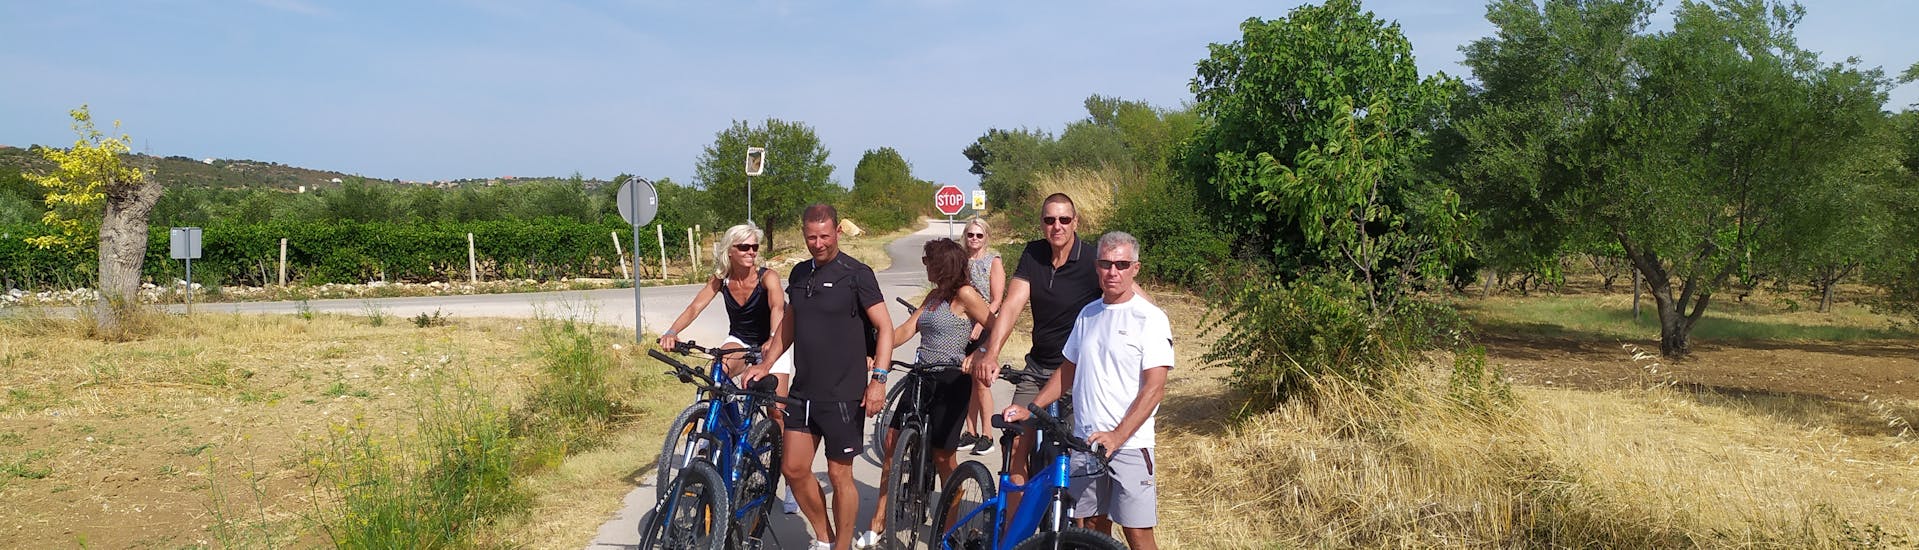 Participants of the difficult mountain bike tour to Krka National Park with Karika Vodice, pose for a picture during a break.